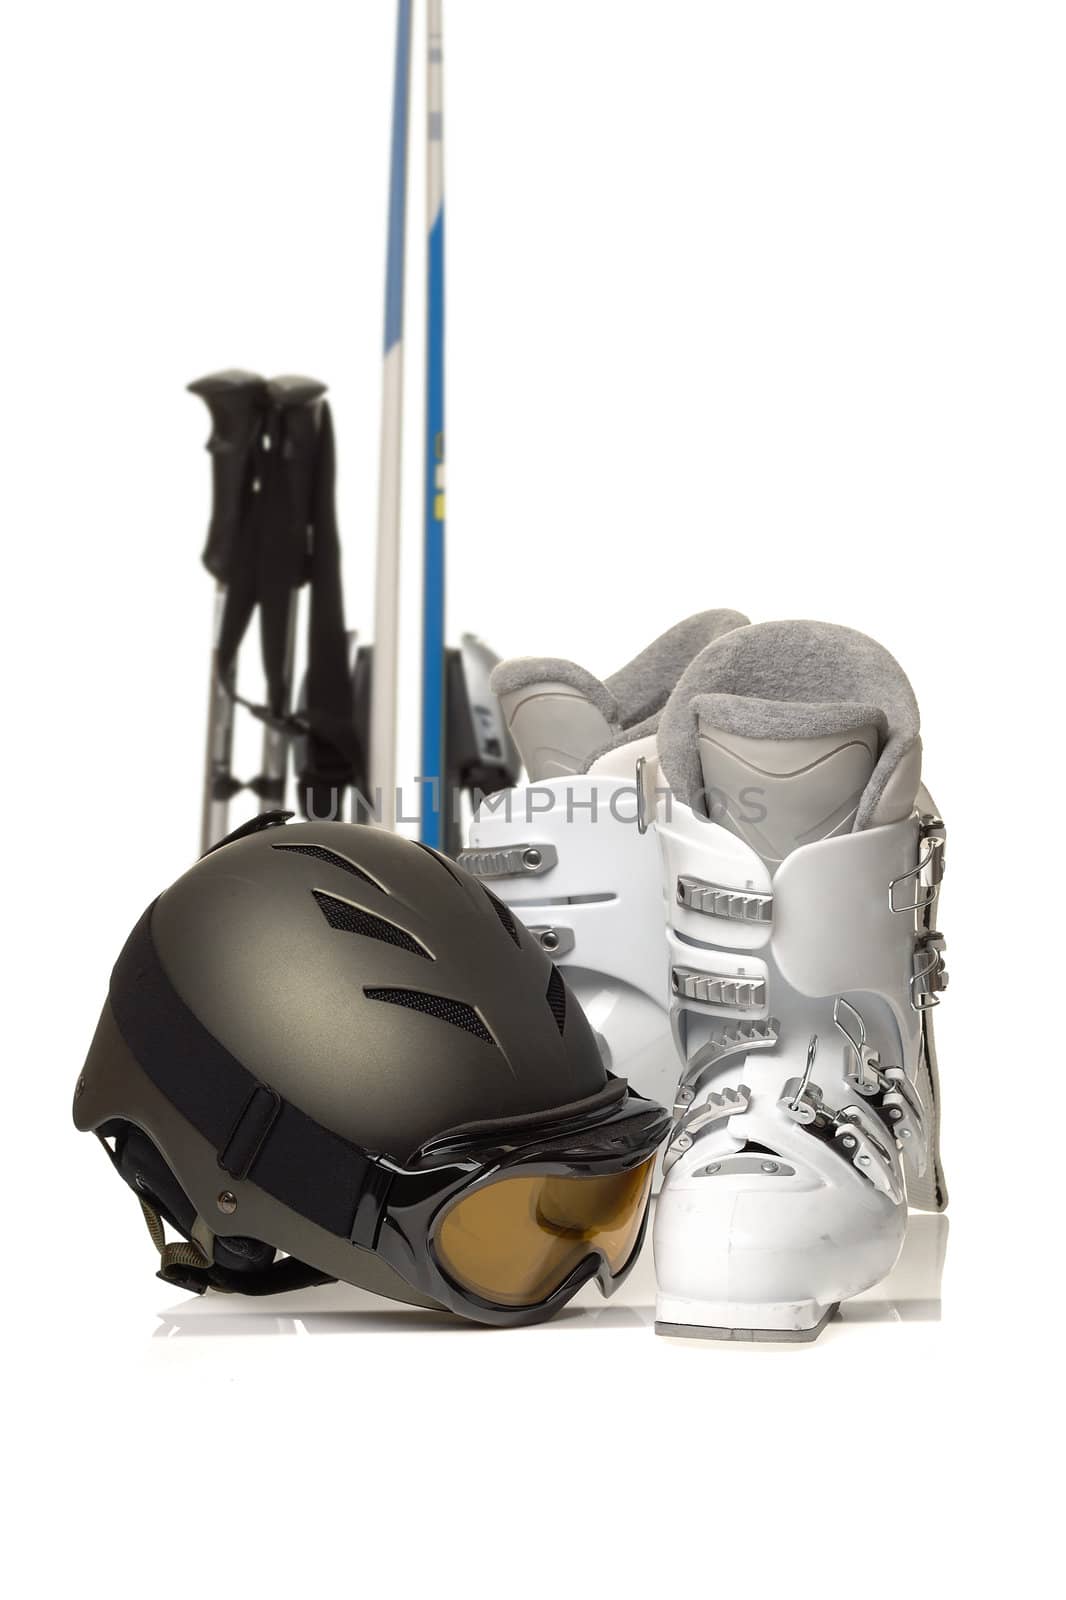 Downhill skiing quipment isolated on white